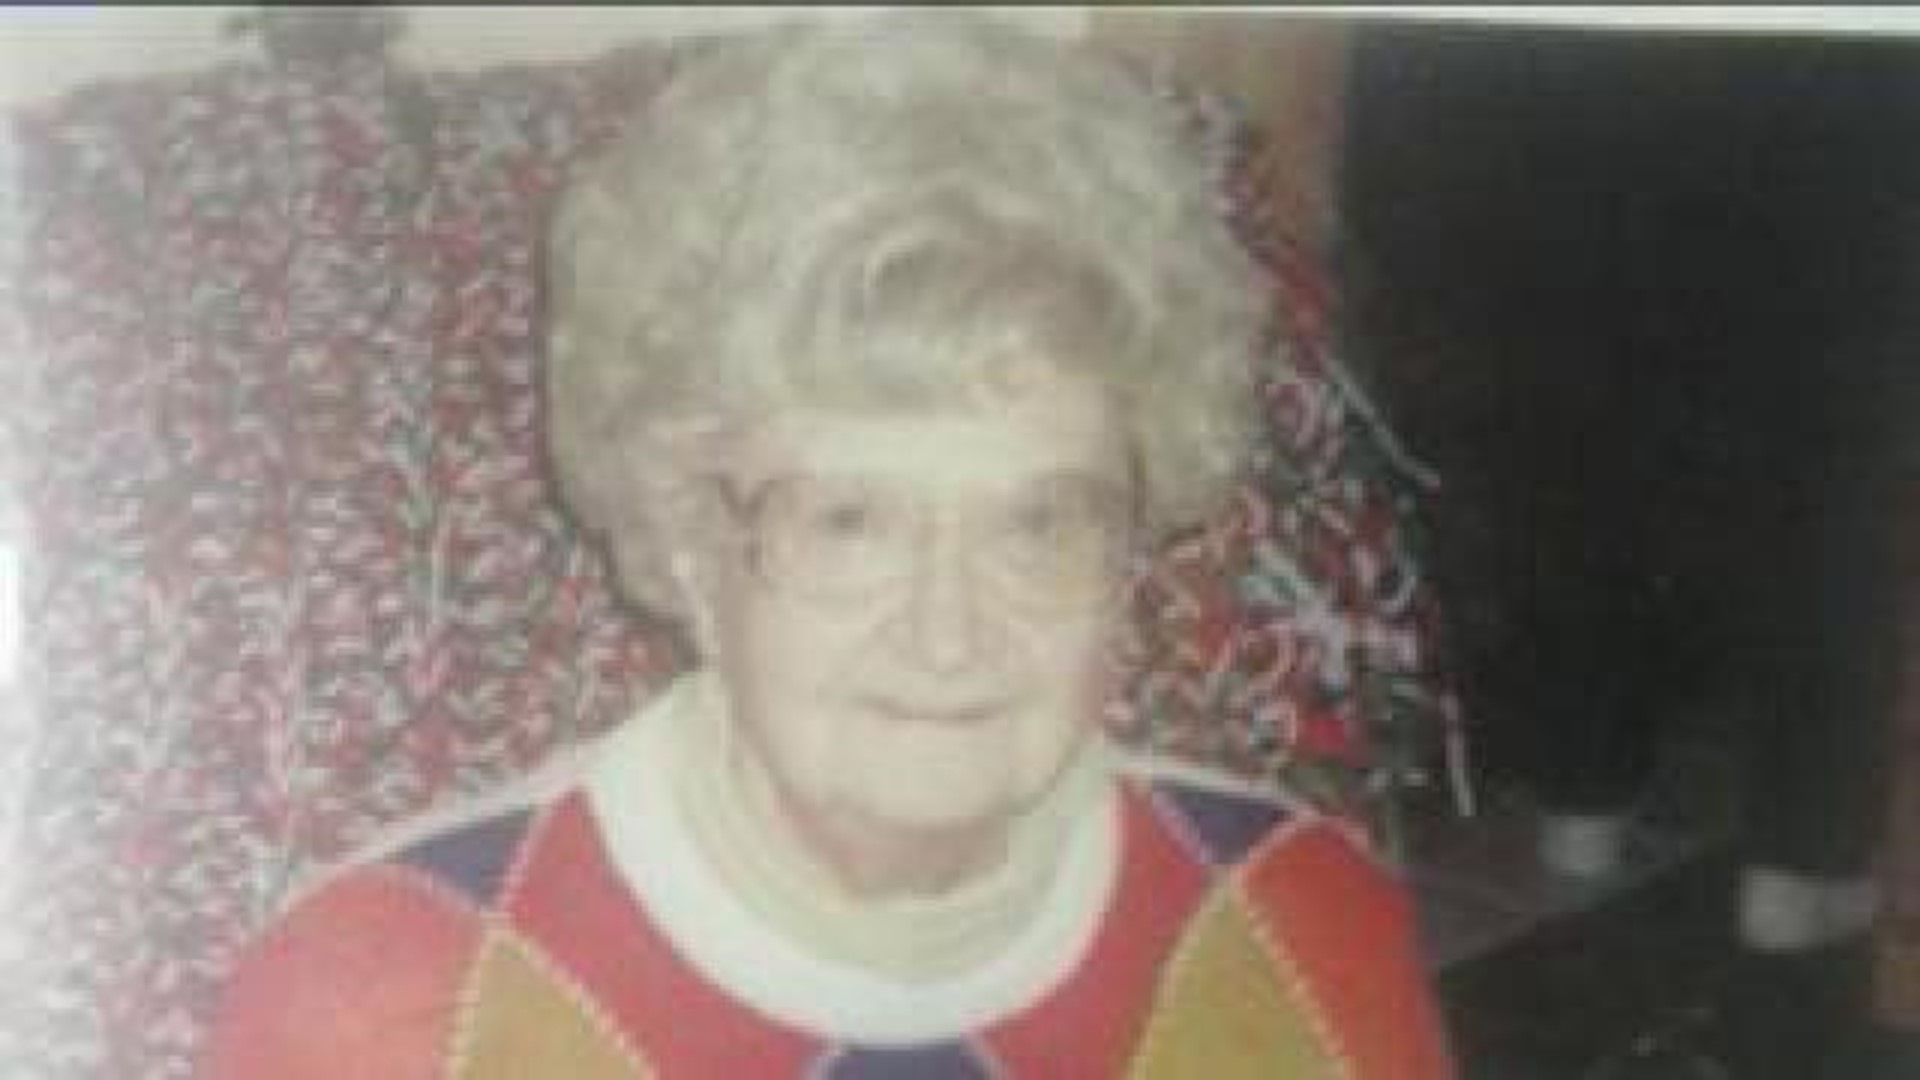 Elderly Woman Killed, Authorities Searching for the Killer